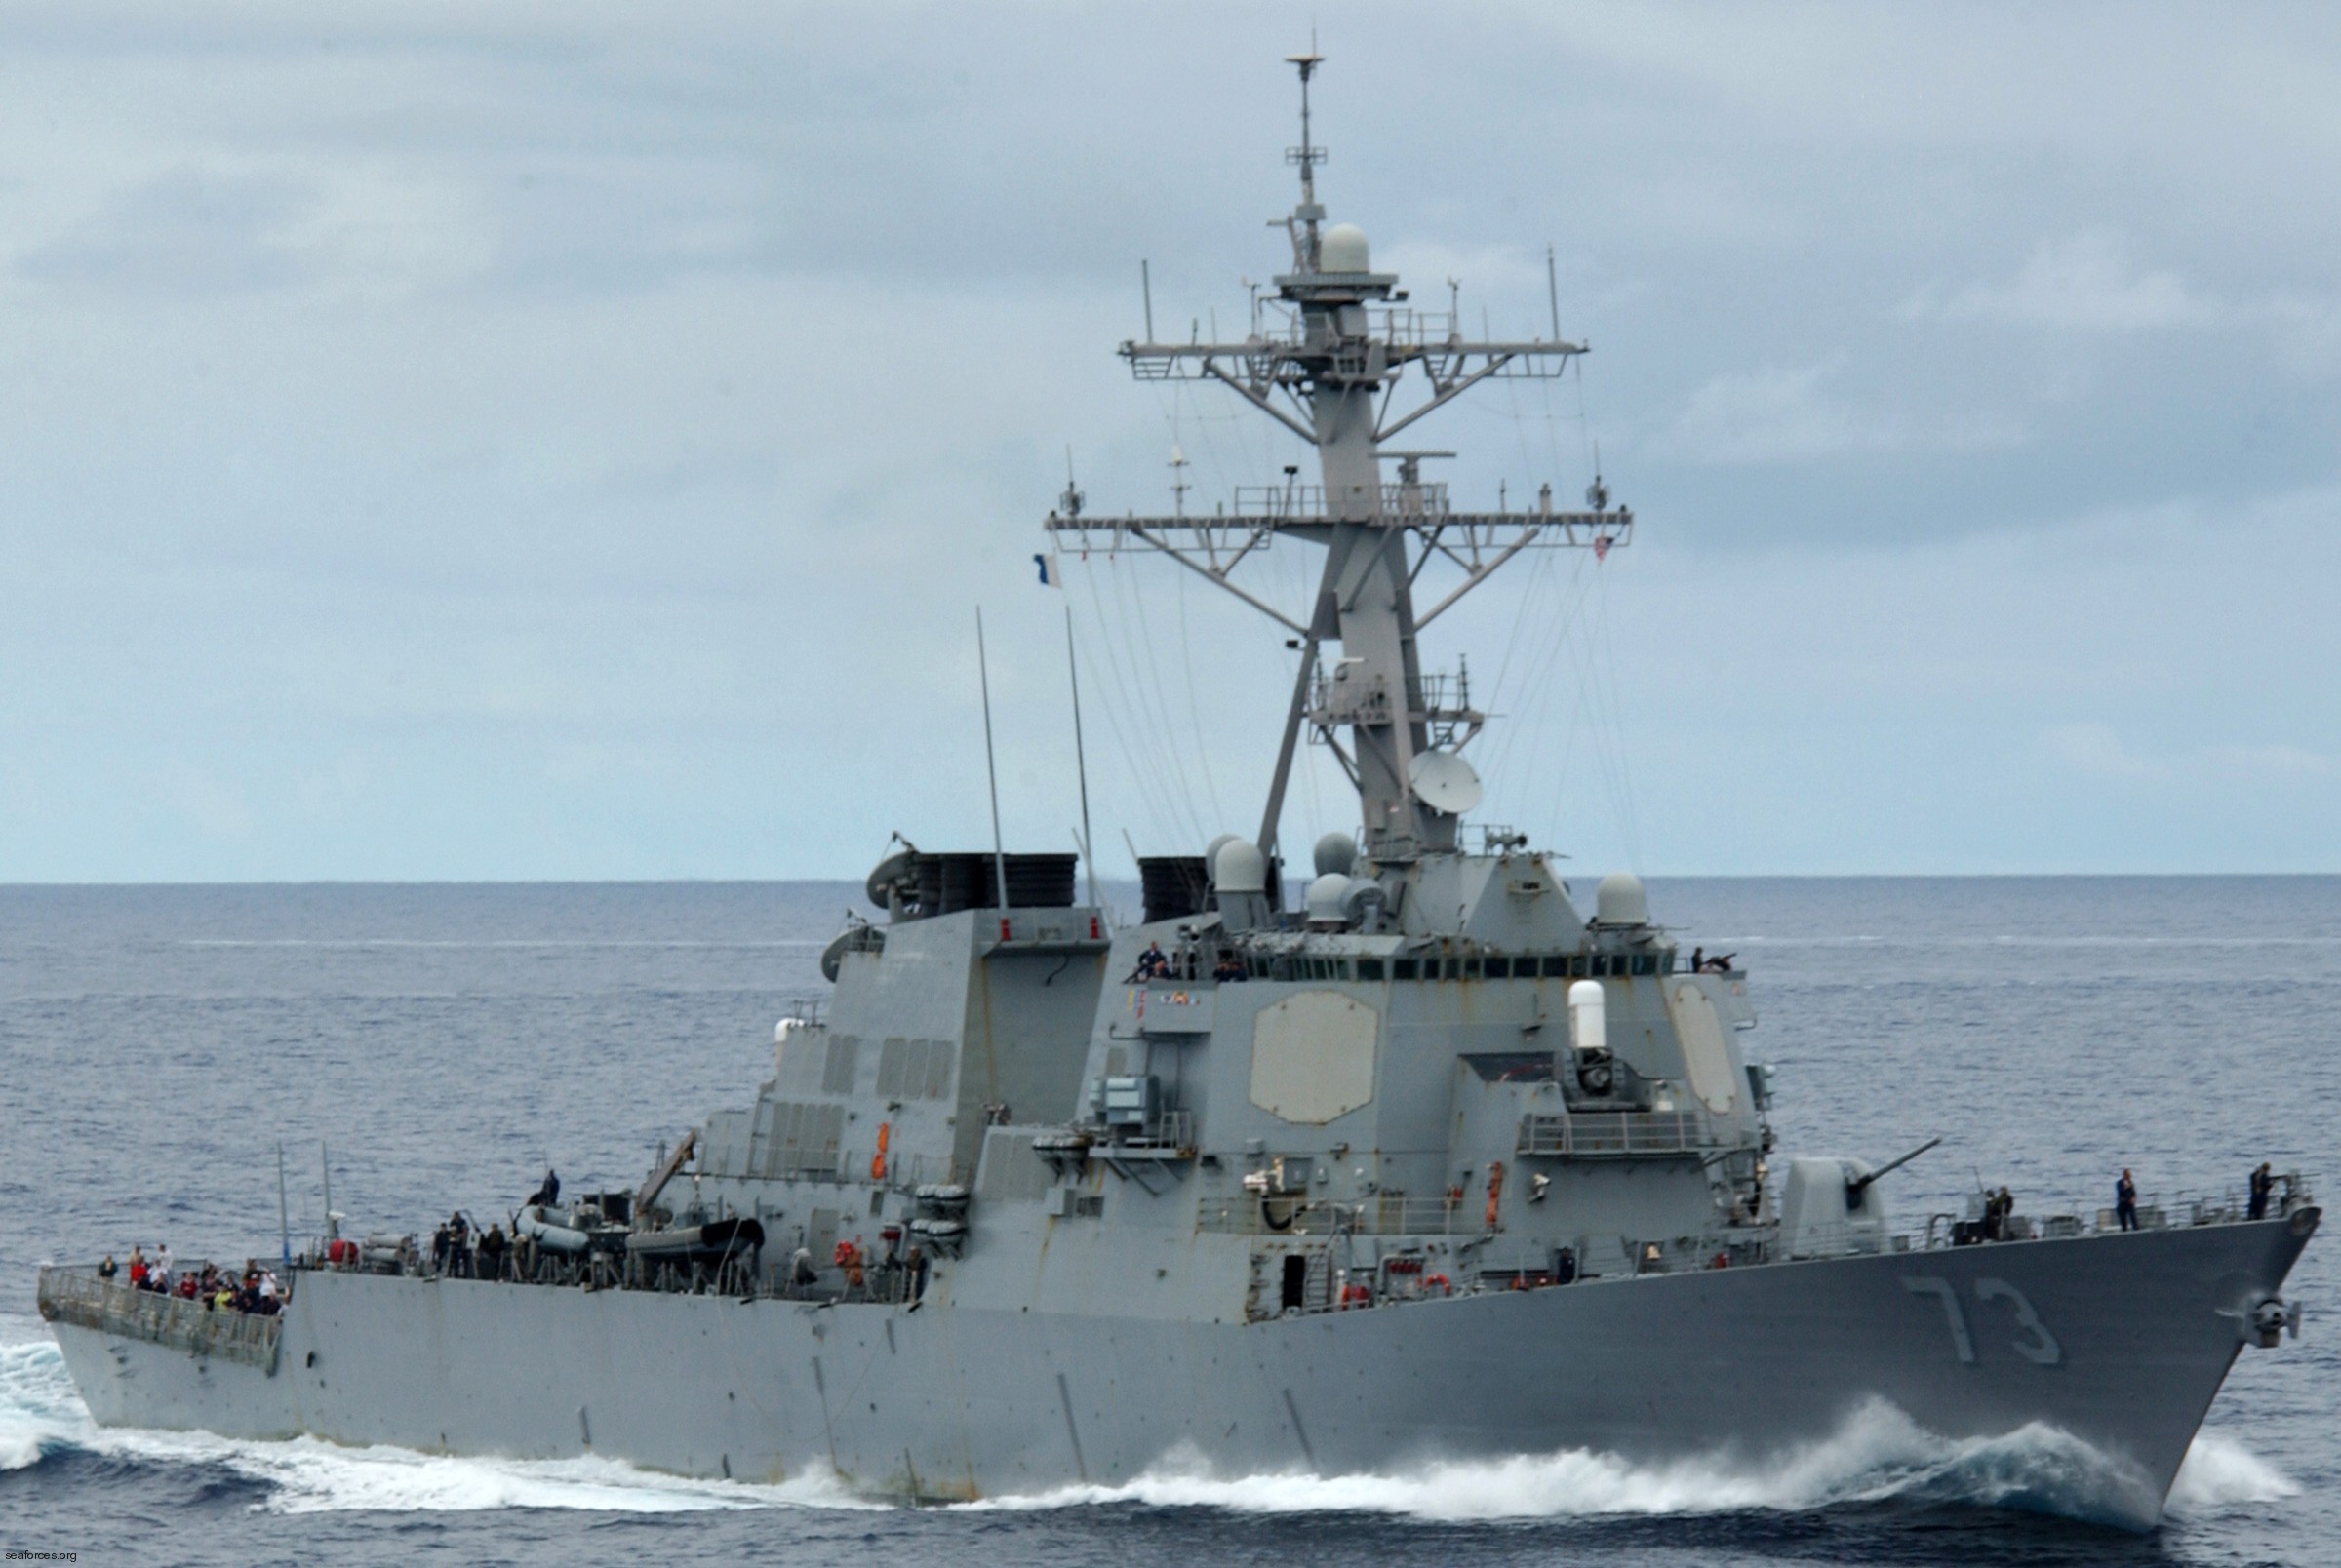 ddg-73 uss decatur guided missile destroyer arleigh burke class aegis bmd 37